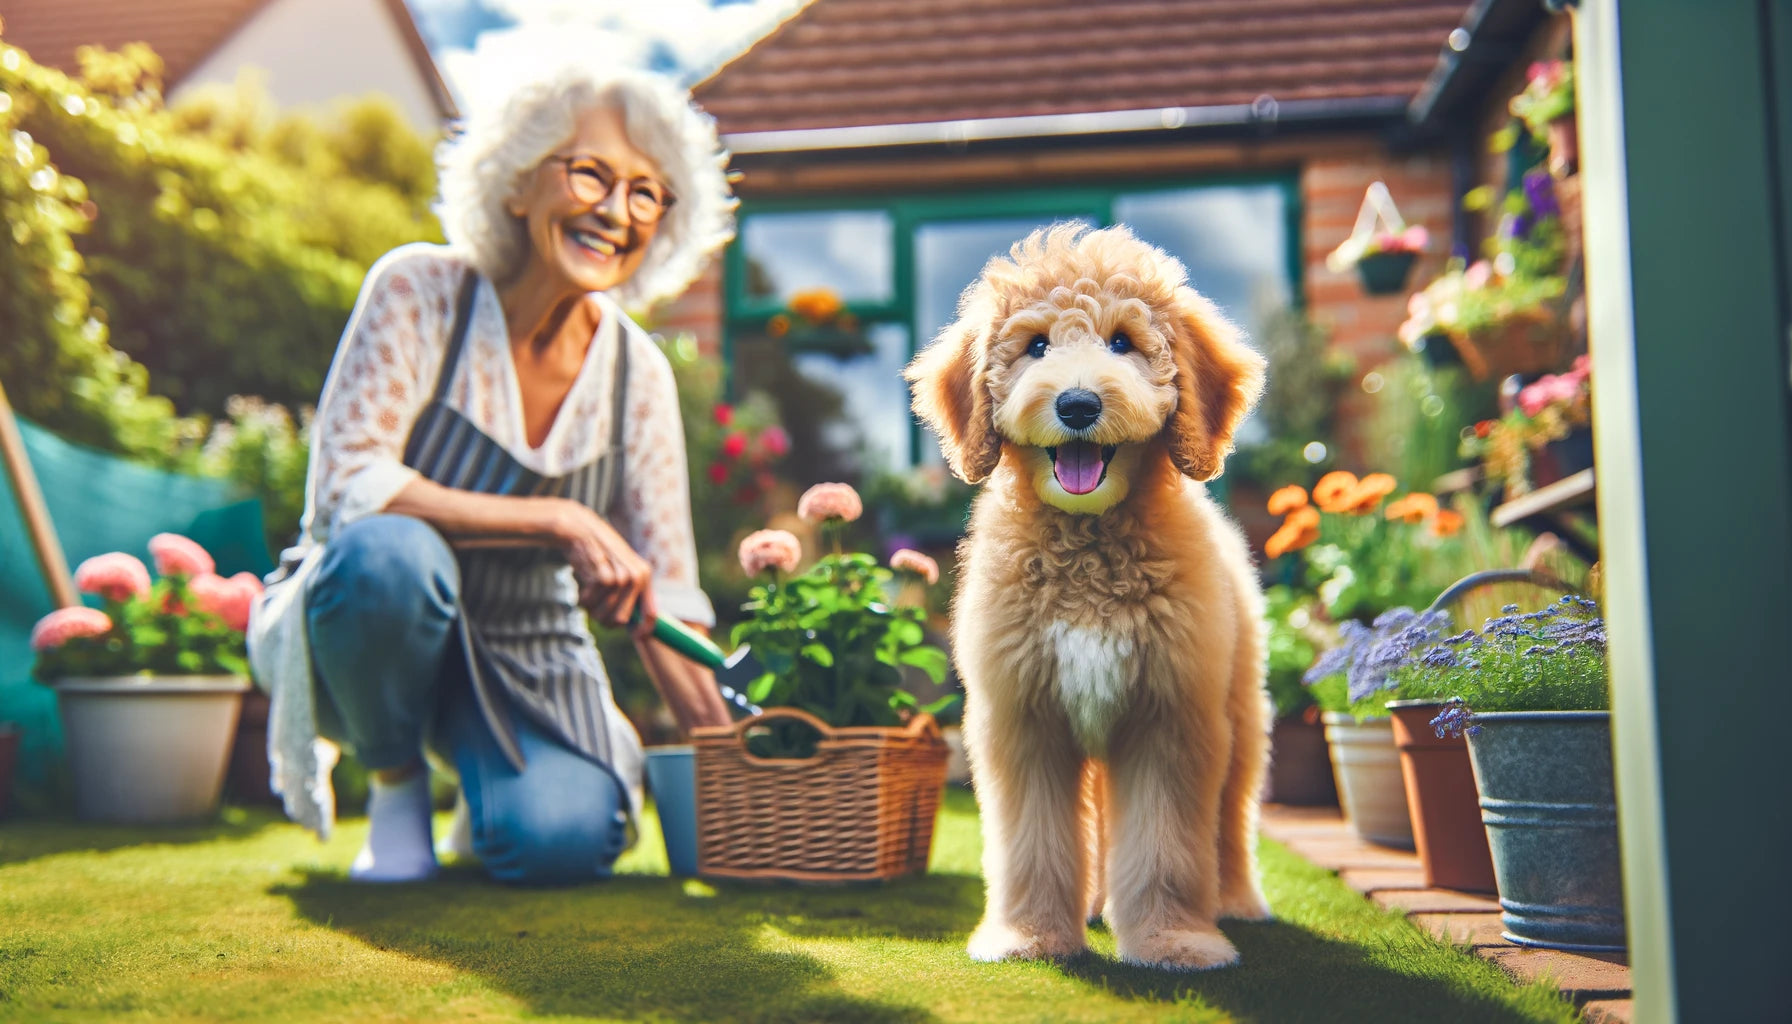 Playful yet Protective Mini Goldendoodle standing guard in front of a smiling Baby Boomer gardening outside, showing the dog's dual role as a companion.